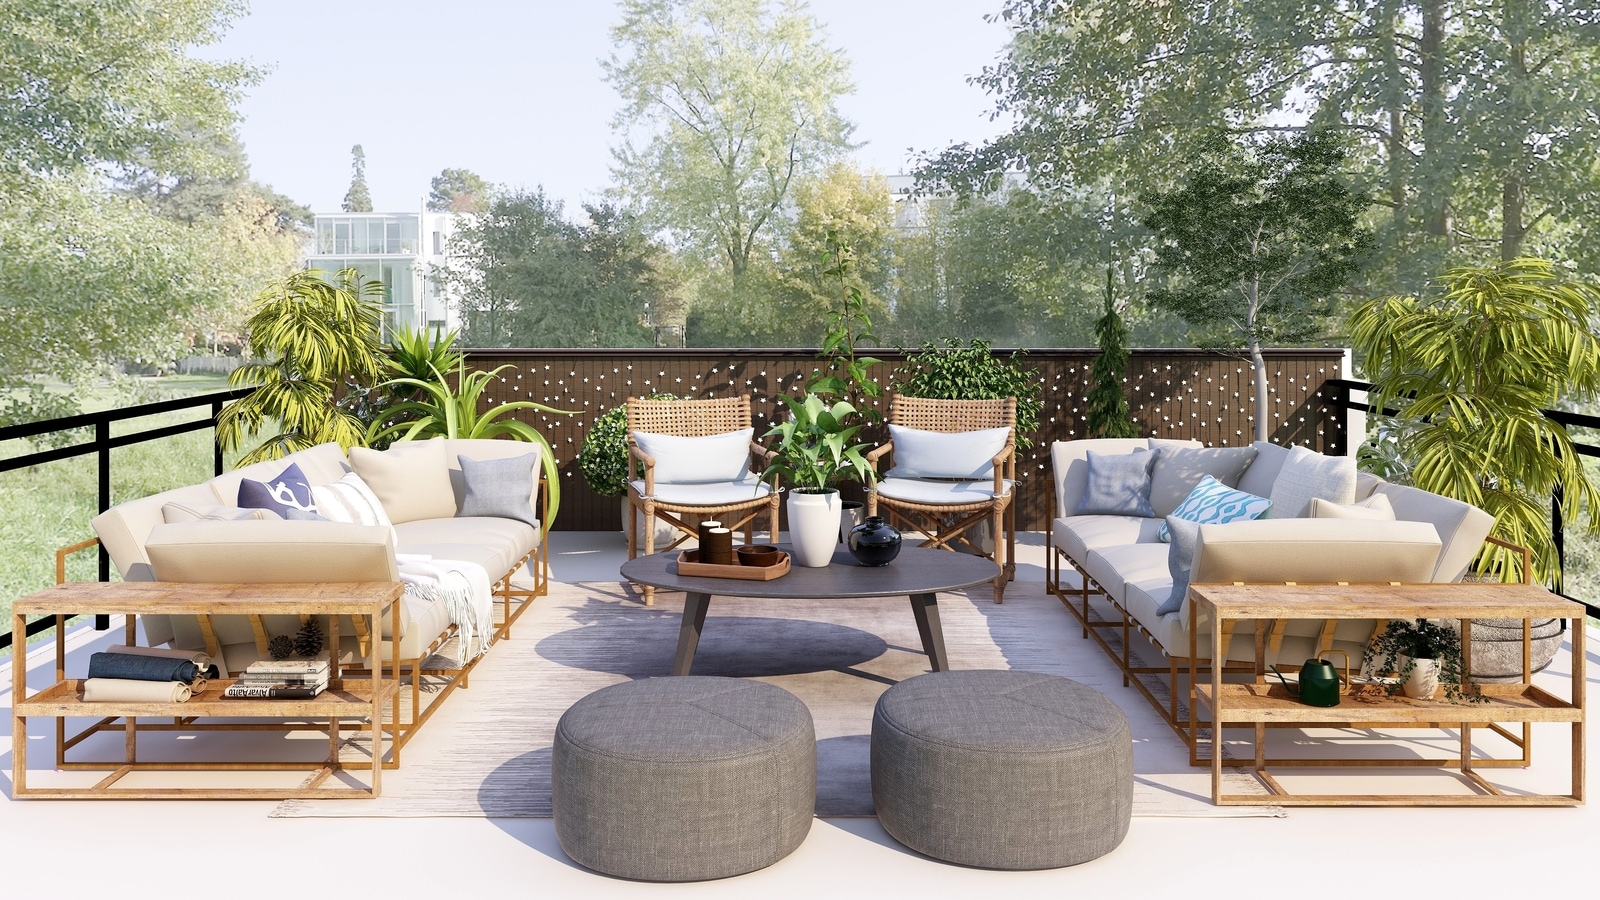 Home interior decor tips: Here's how to design a rooftop terrace Times